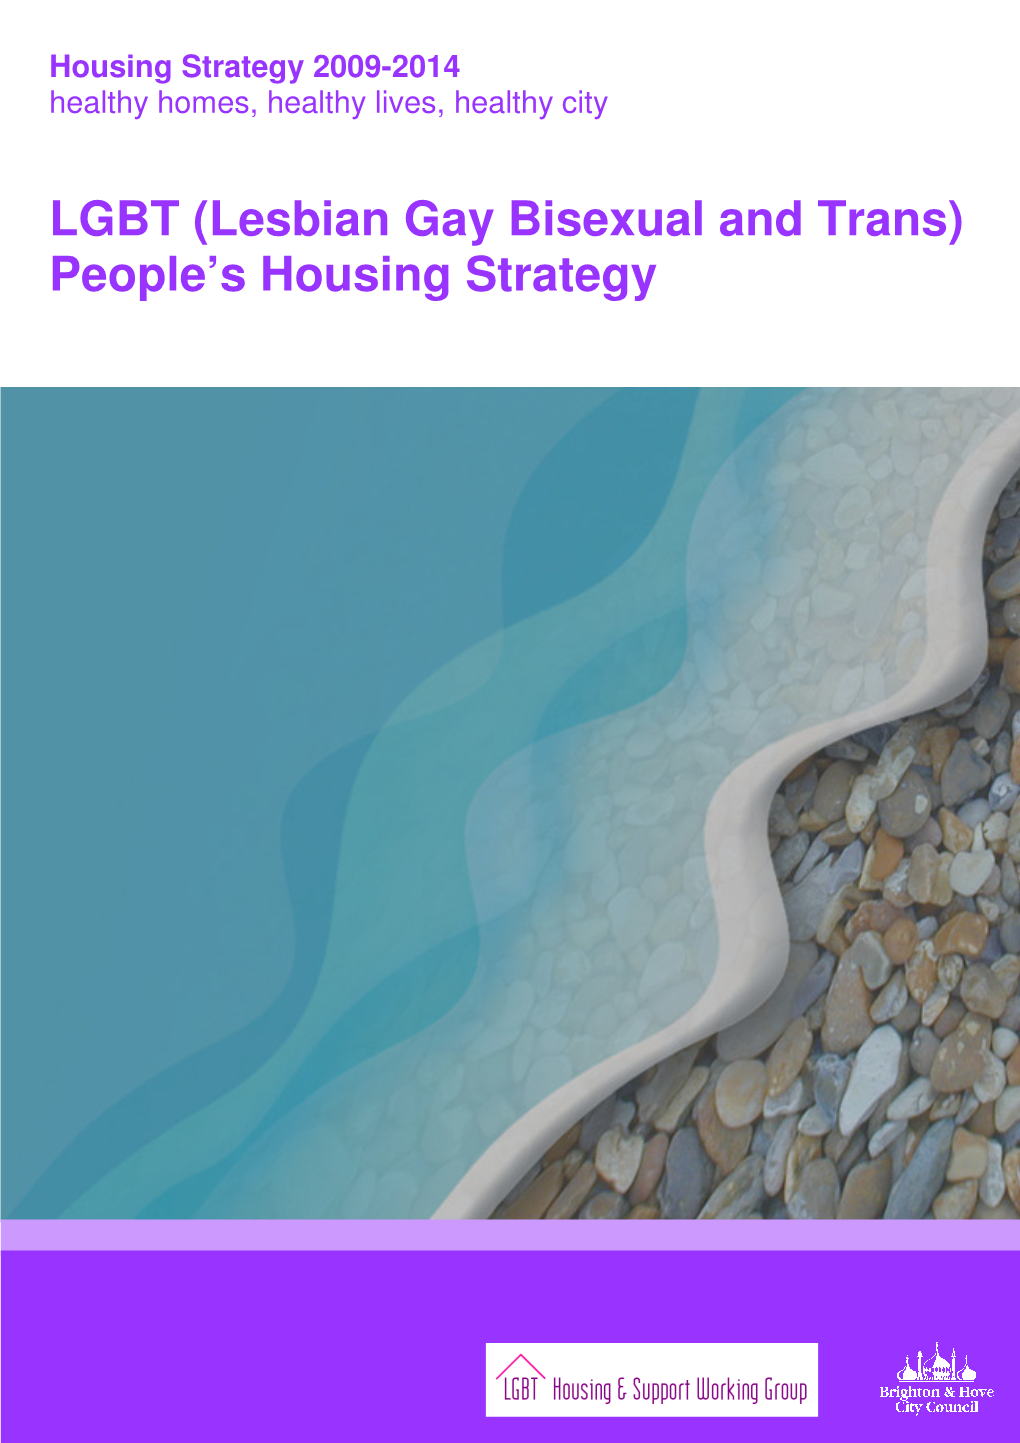 LGBT (Lesbian Gay Bisexual and Trans) People's Housing Strategy